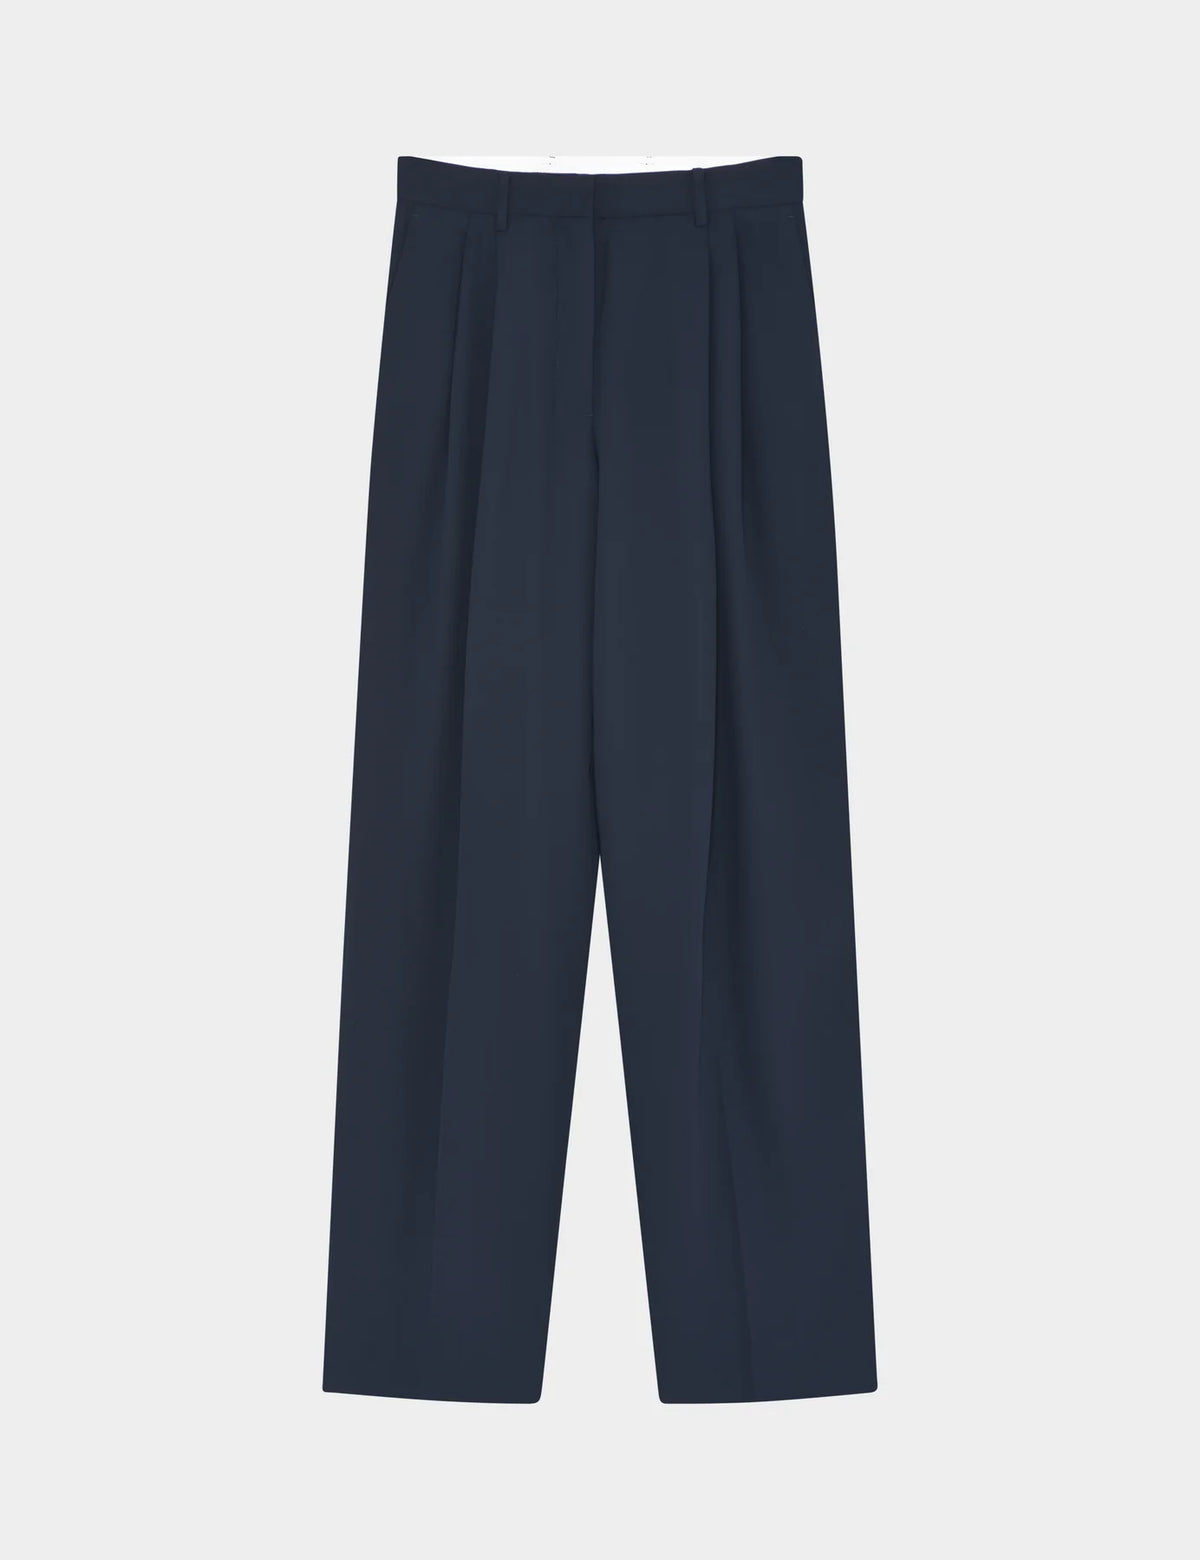 Black high waisted trousers 